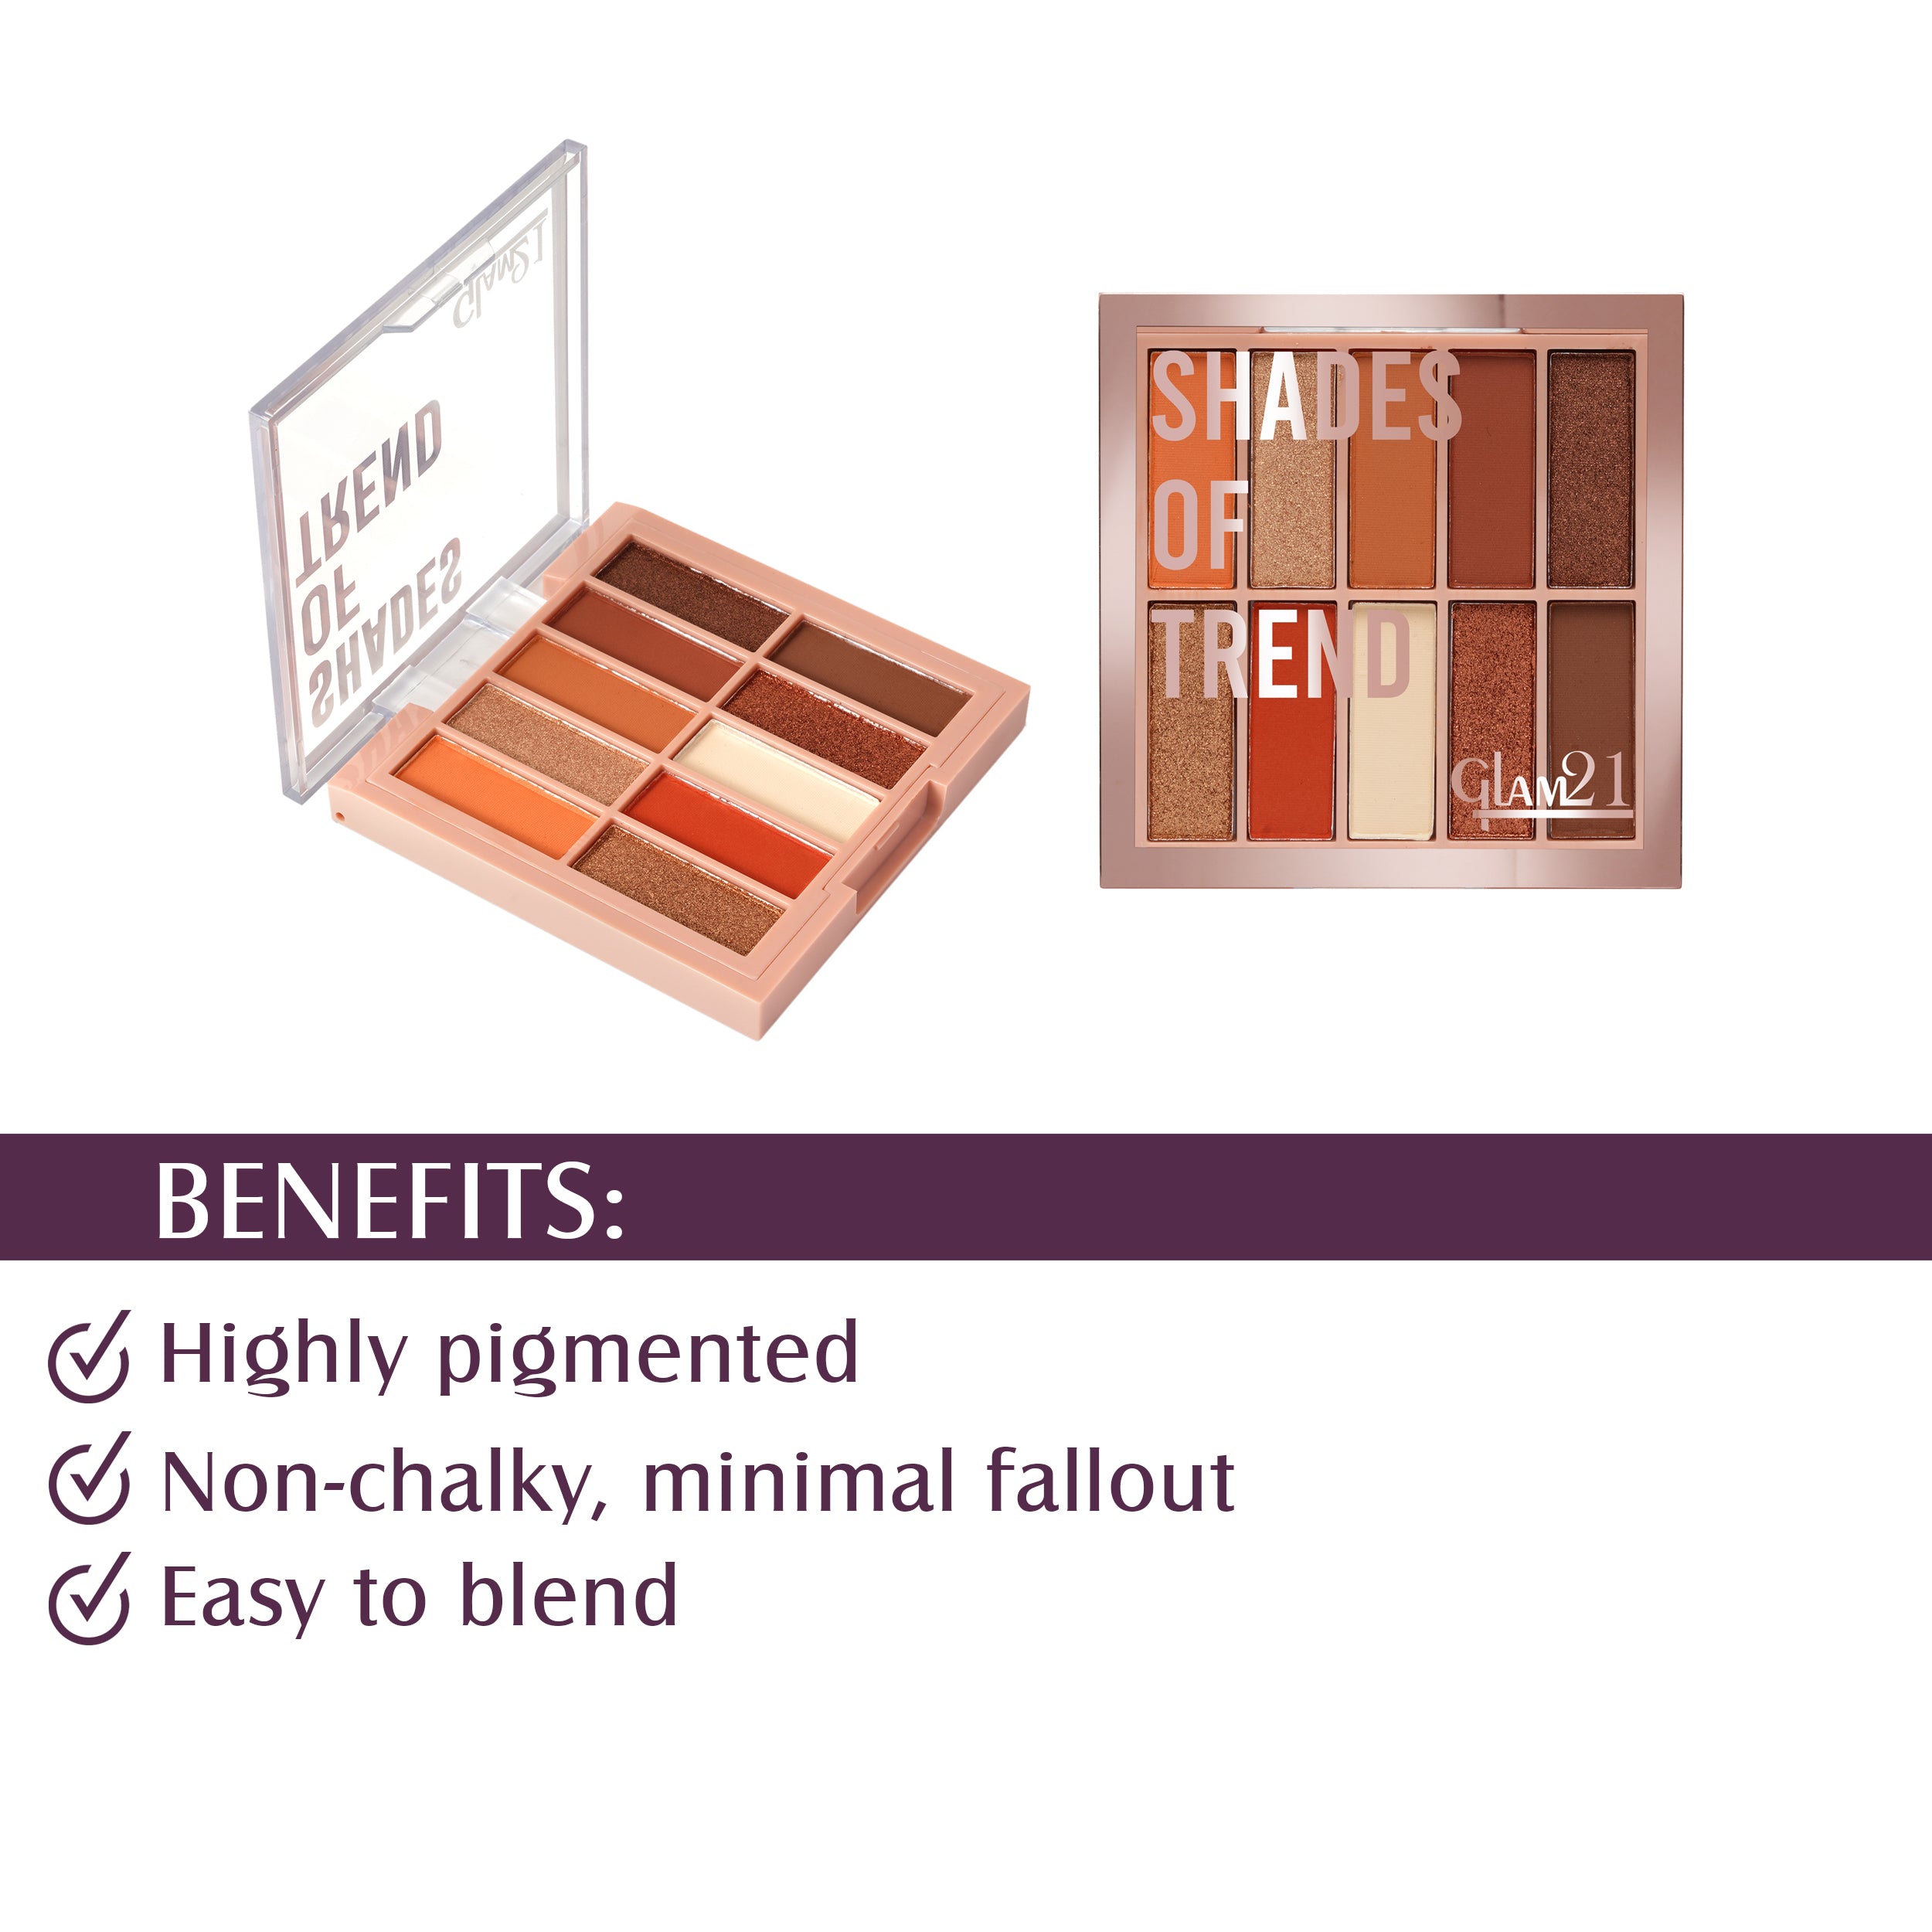 Glam21 Shades of Trend Eyeshadow Palette 10 Highly Pigmented Shades Shimmery Finish, 12gm Shade -01